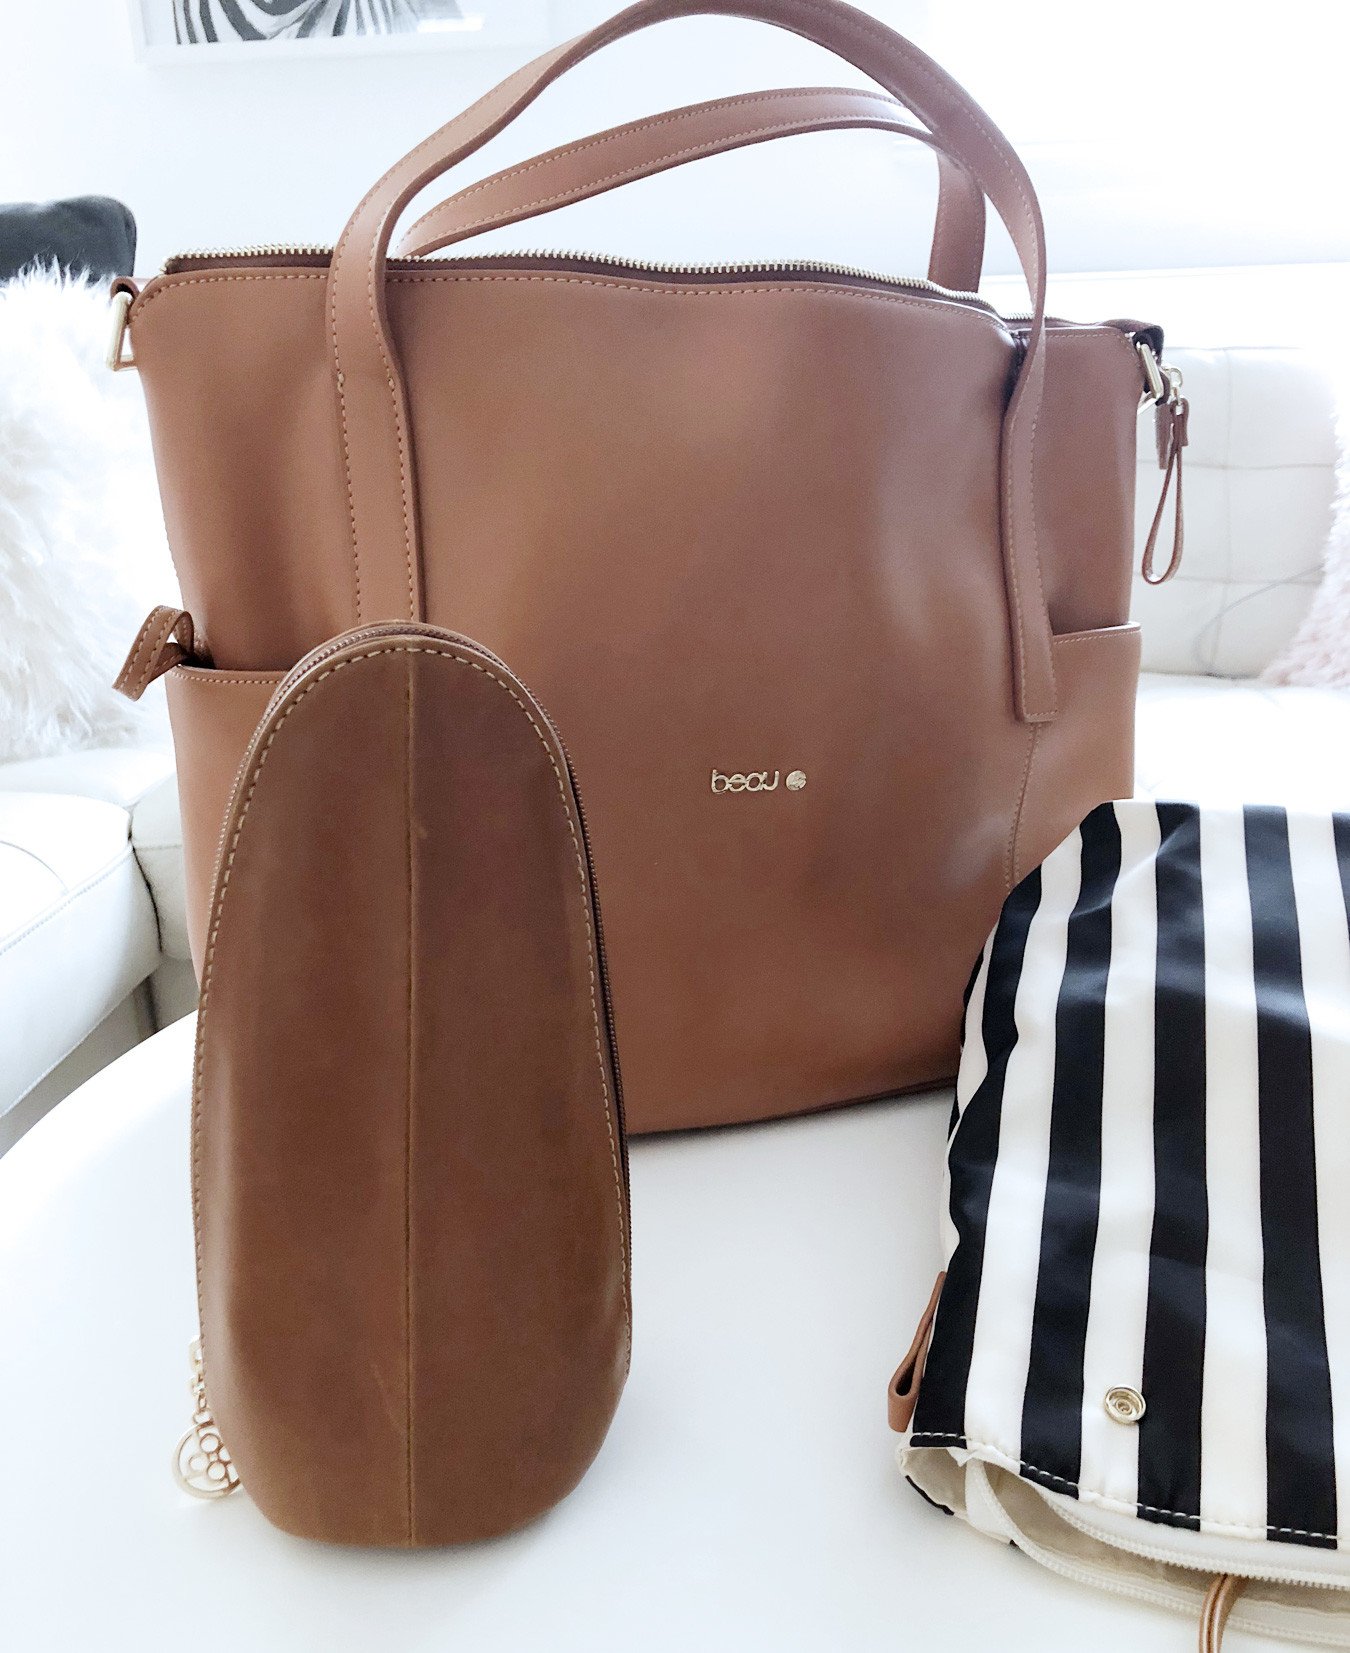 stylish changing bag in tan leather with accessories